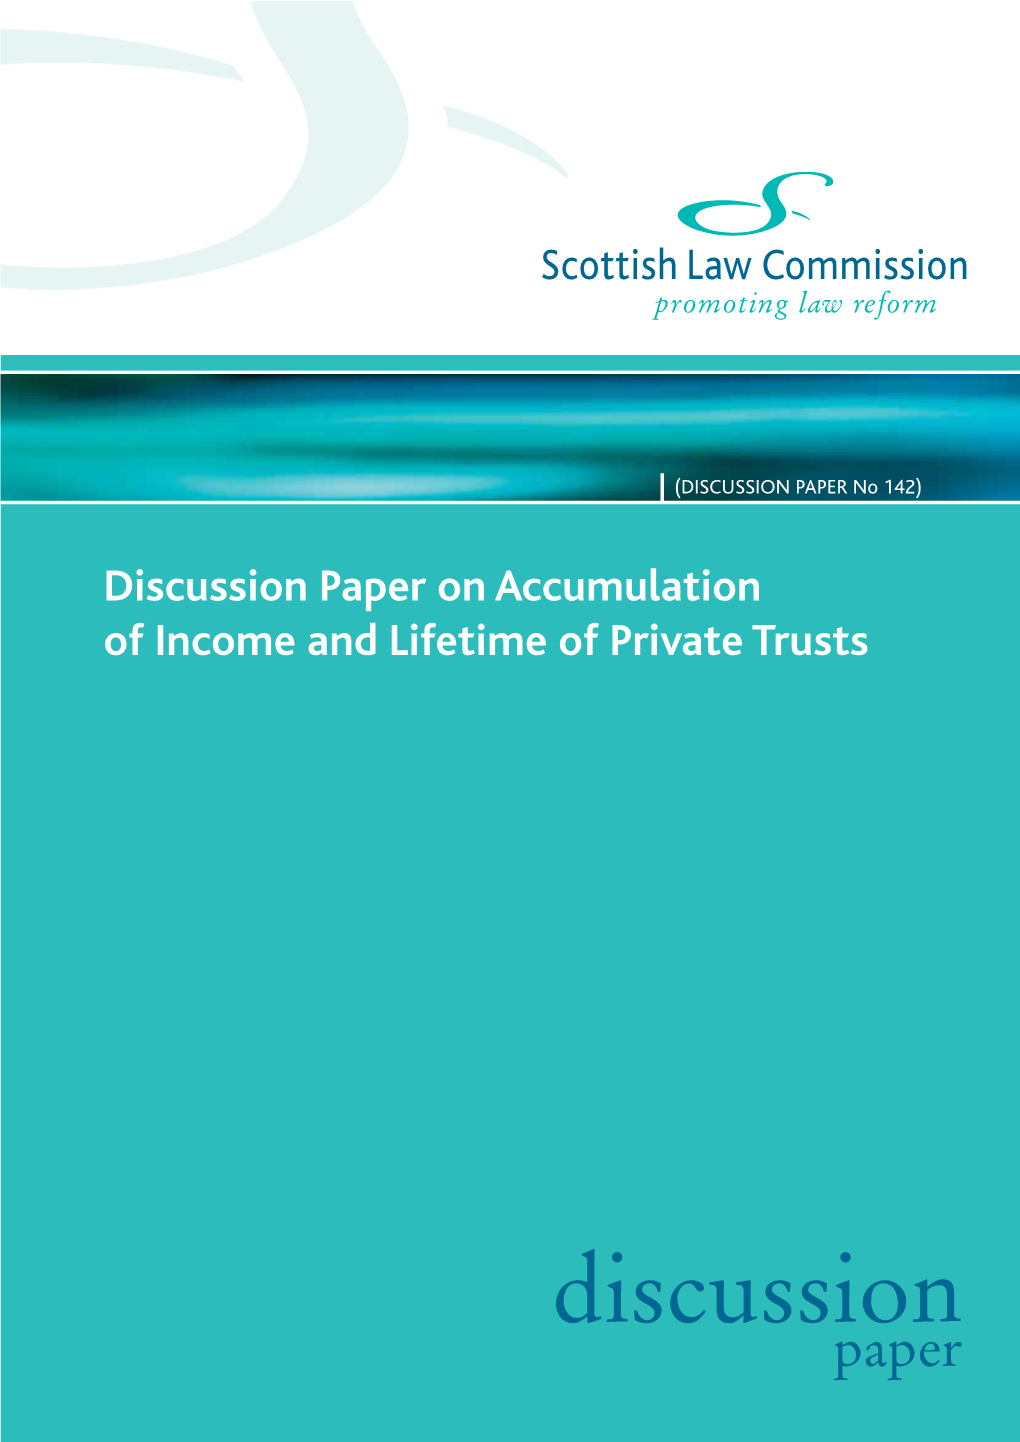 Discussion Paper on Accumulation of Income and Lifetime of Private Trusts (DP 142)